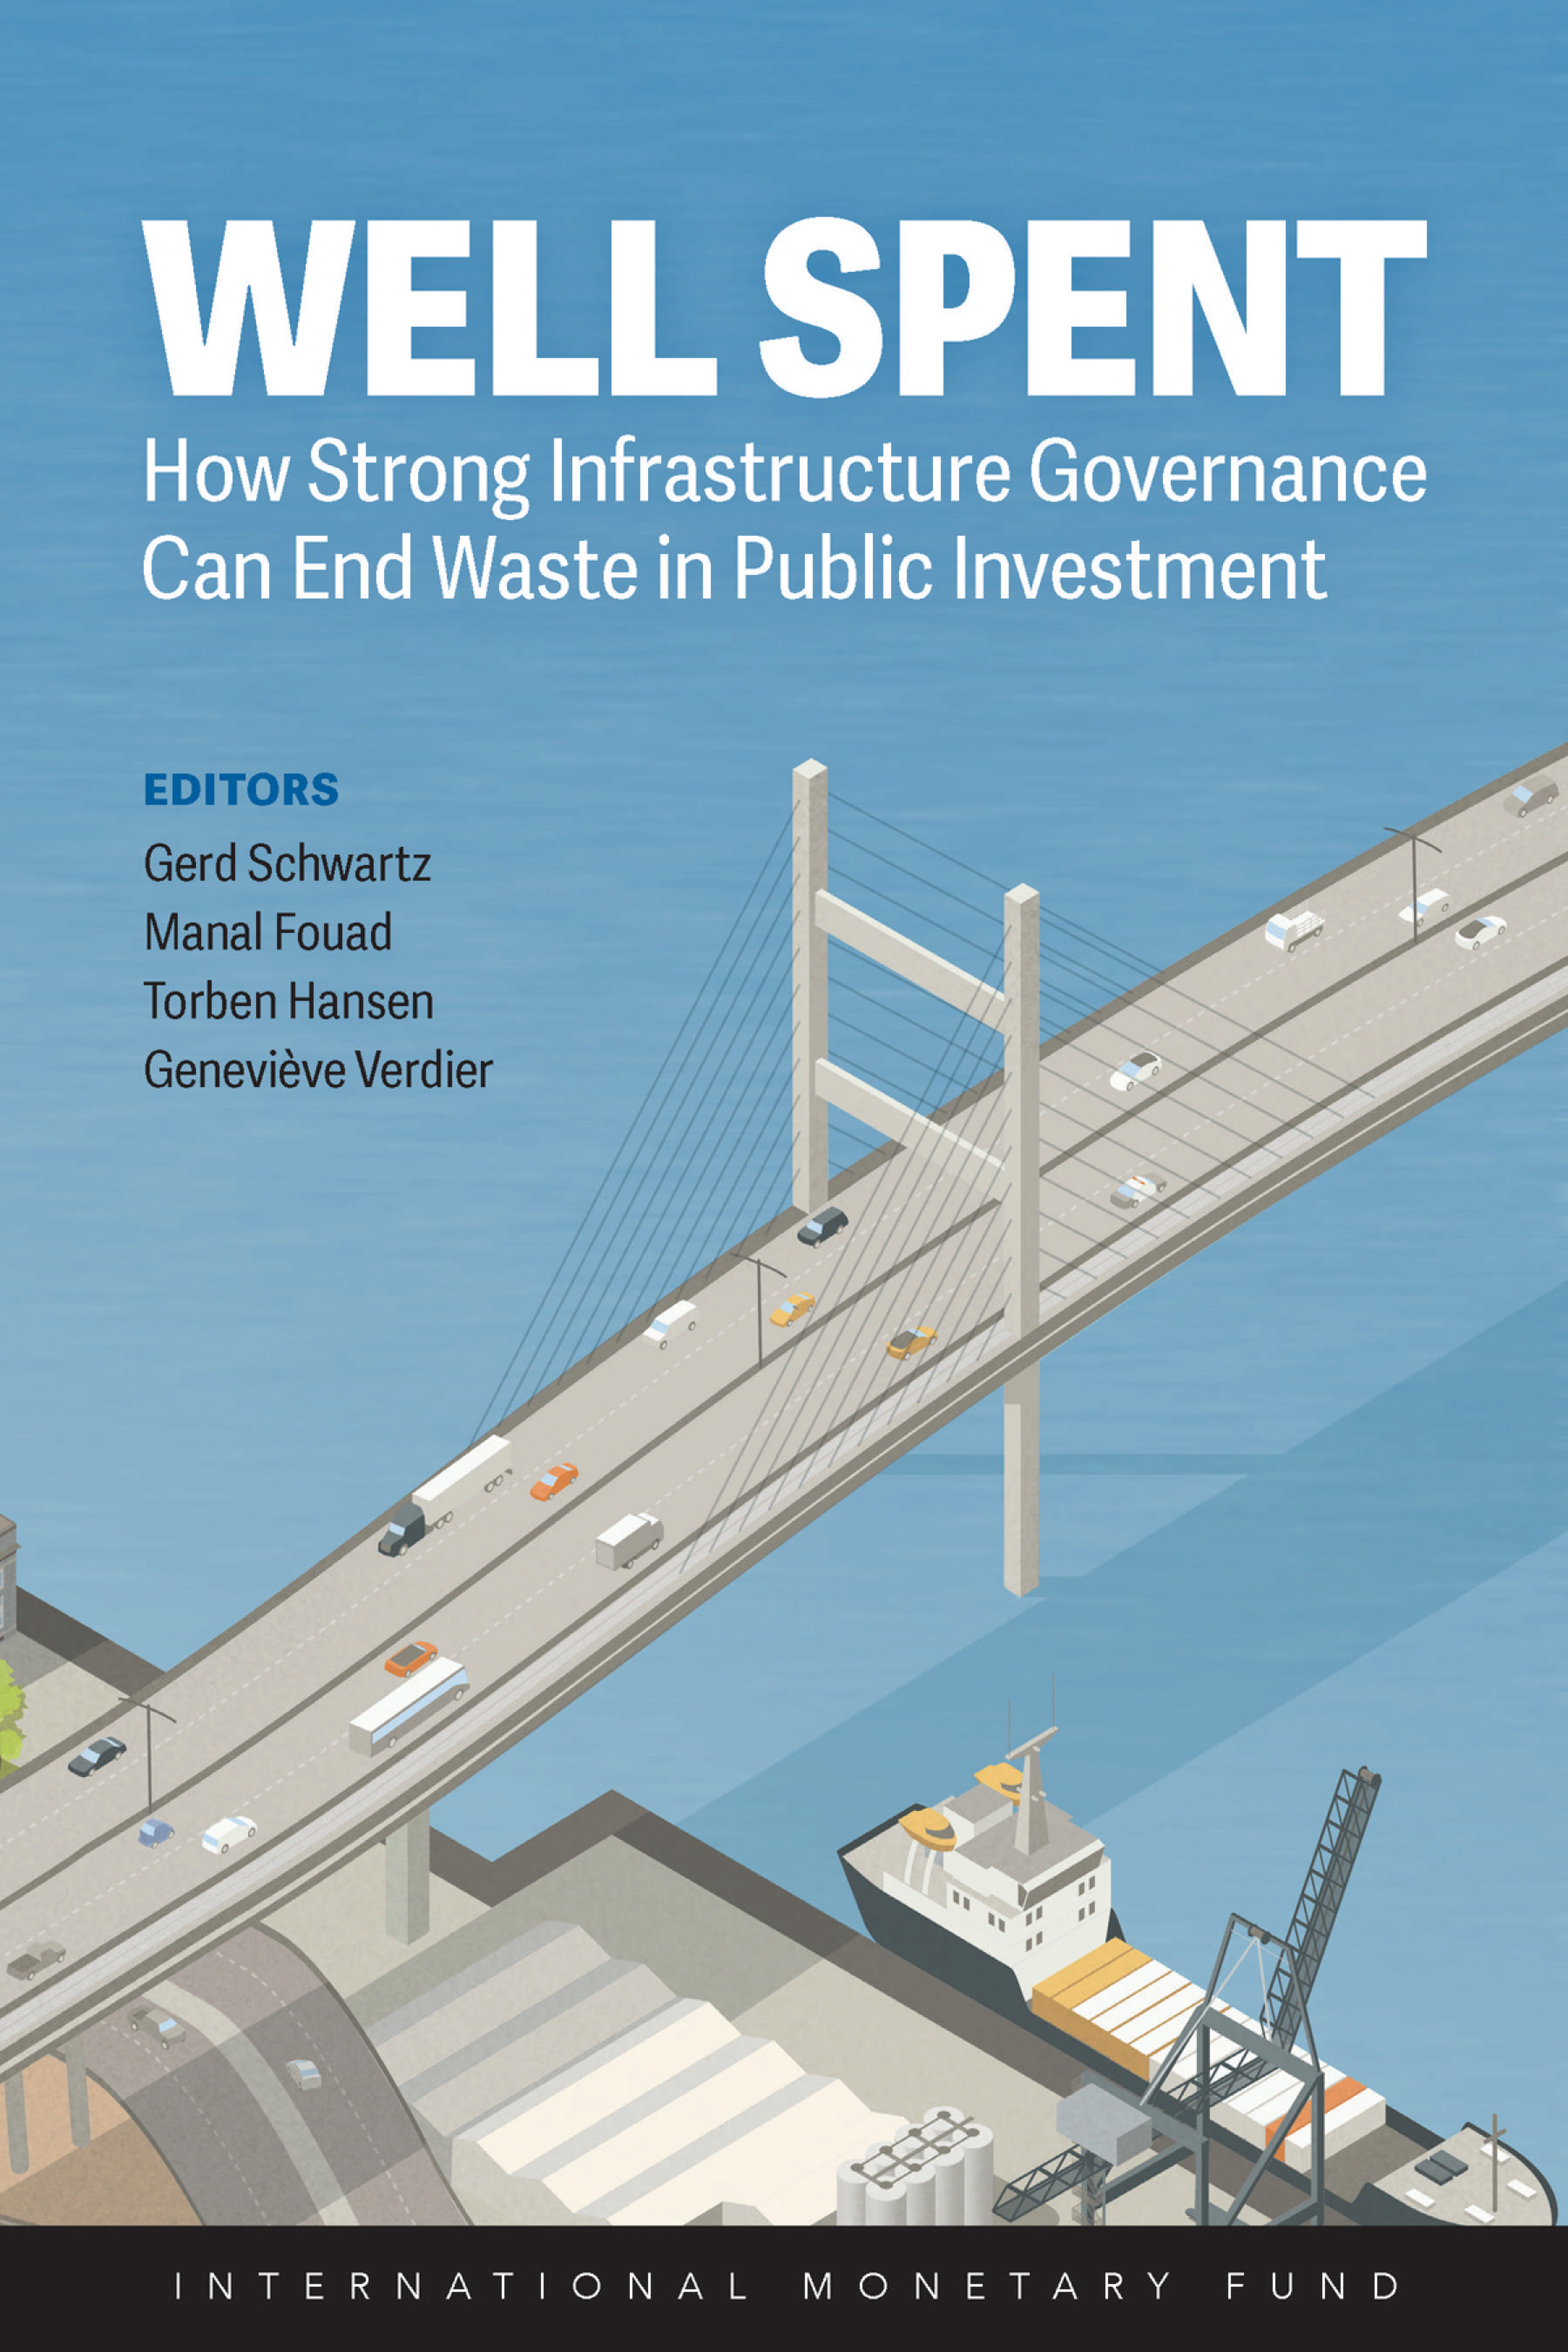 WELL SPENT How Strong Infrastructure Governance Can End Waste in Public Investment